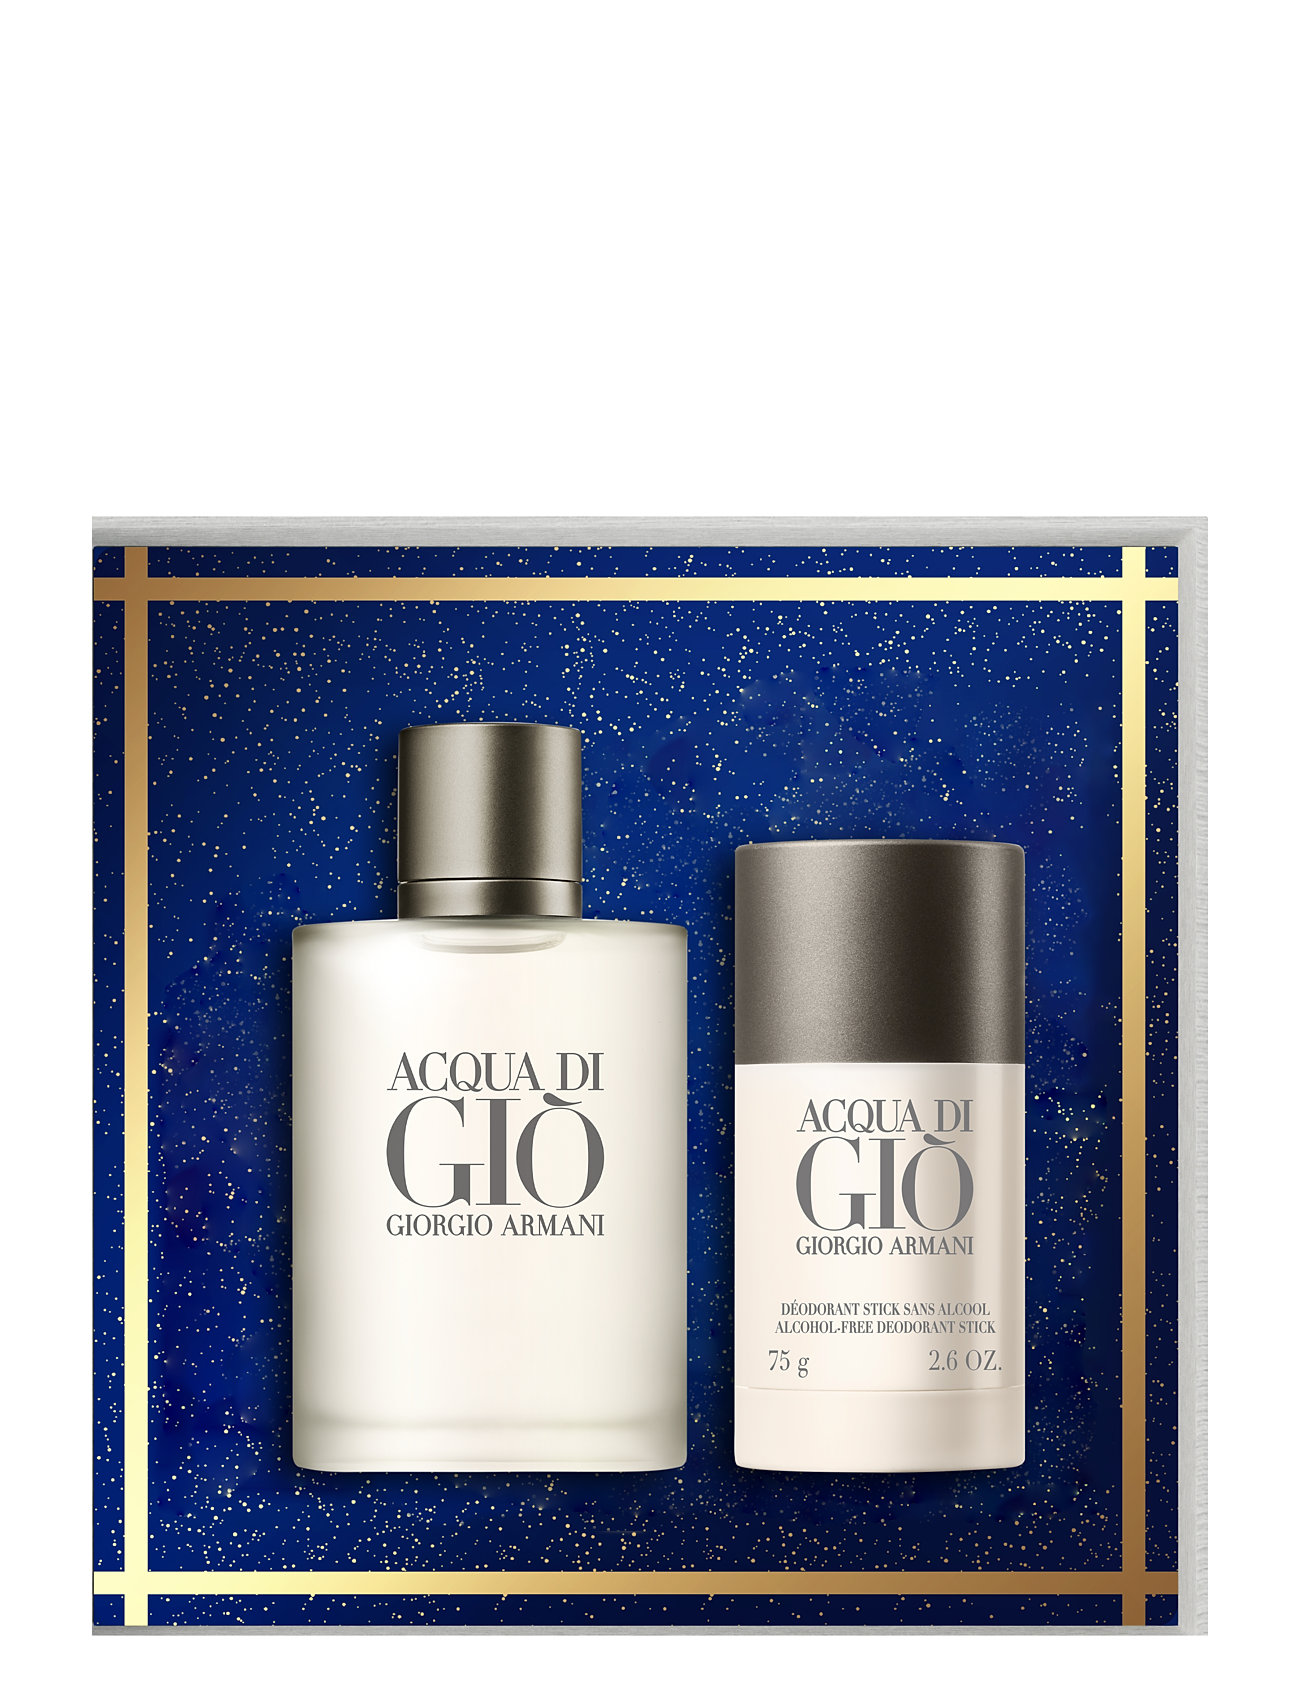 Adgh Edt  Holiday 23 Beauty Men All Sets Nude Armani